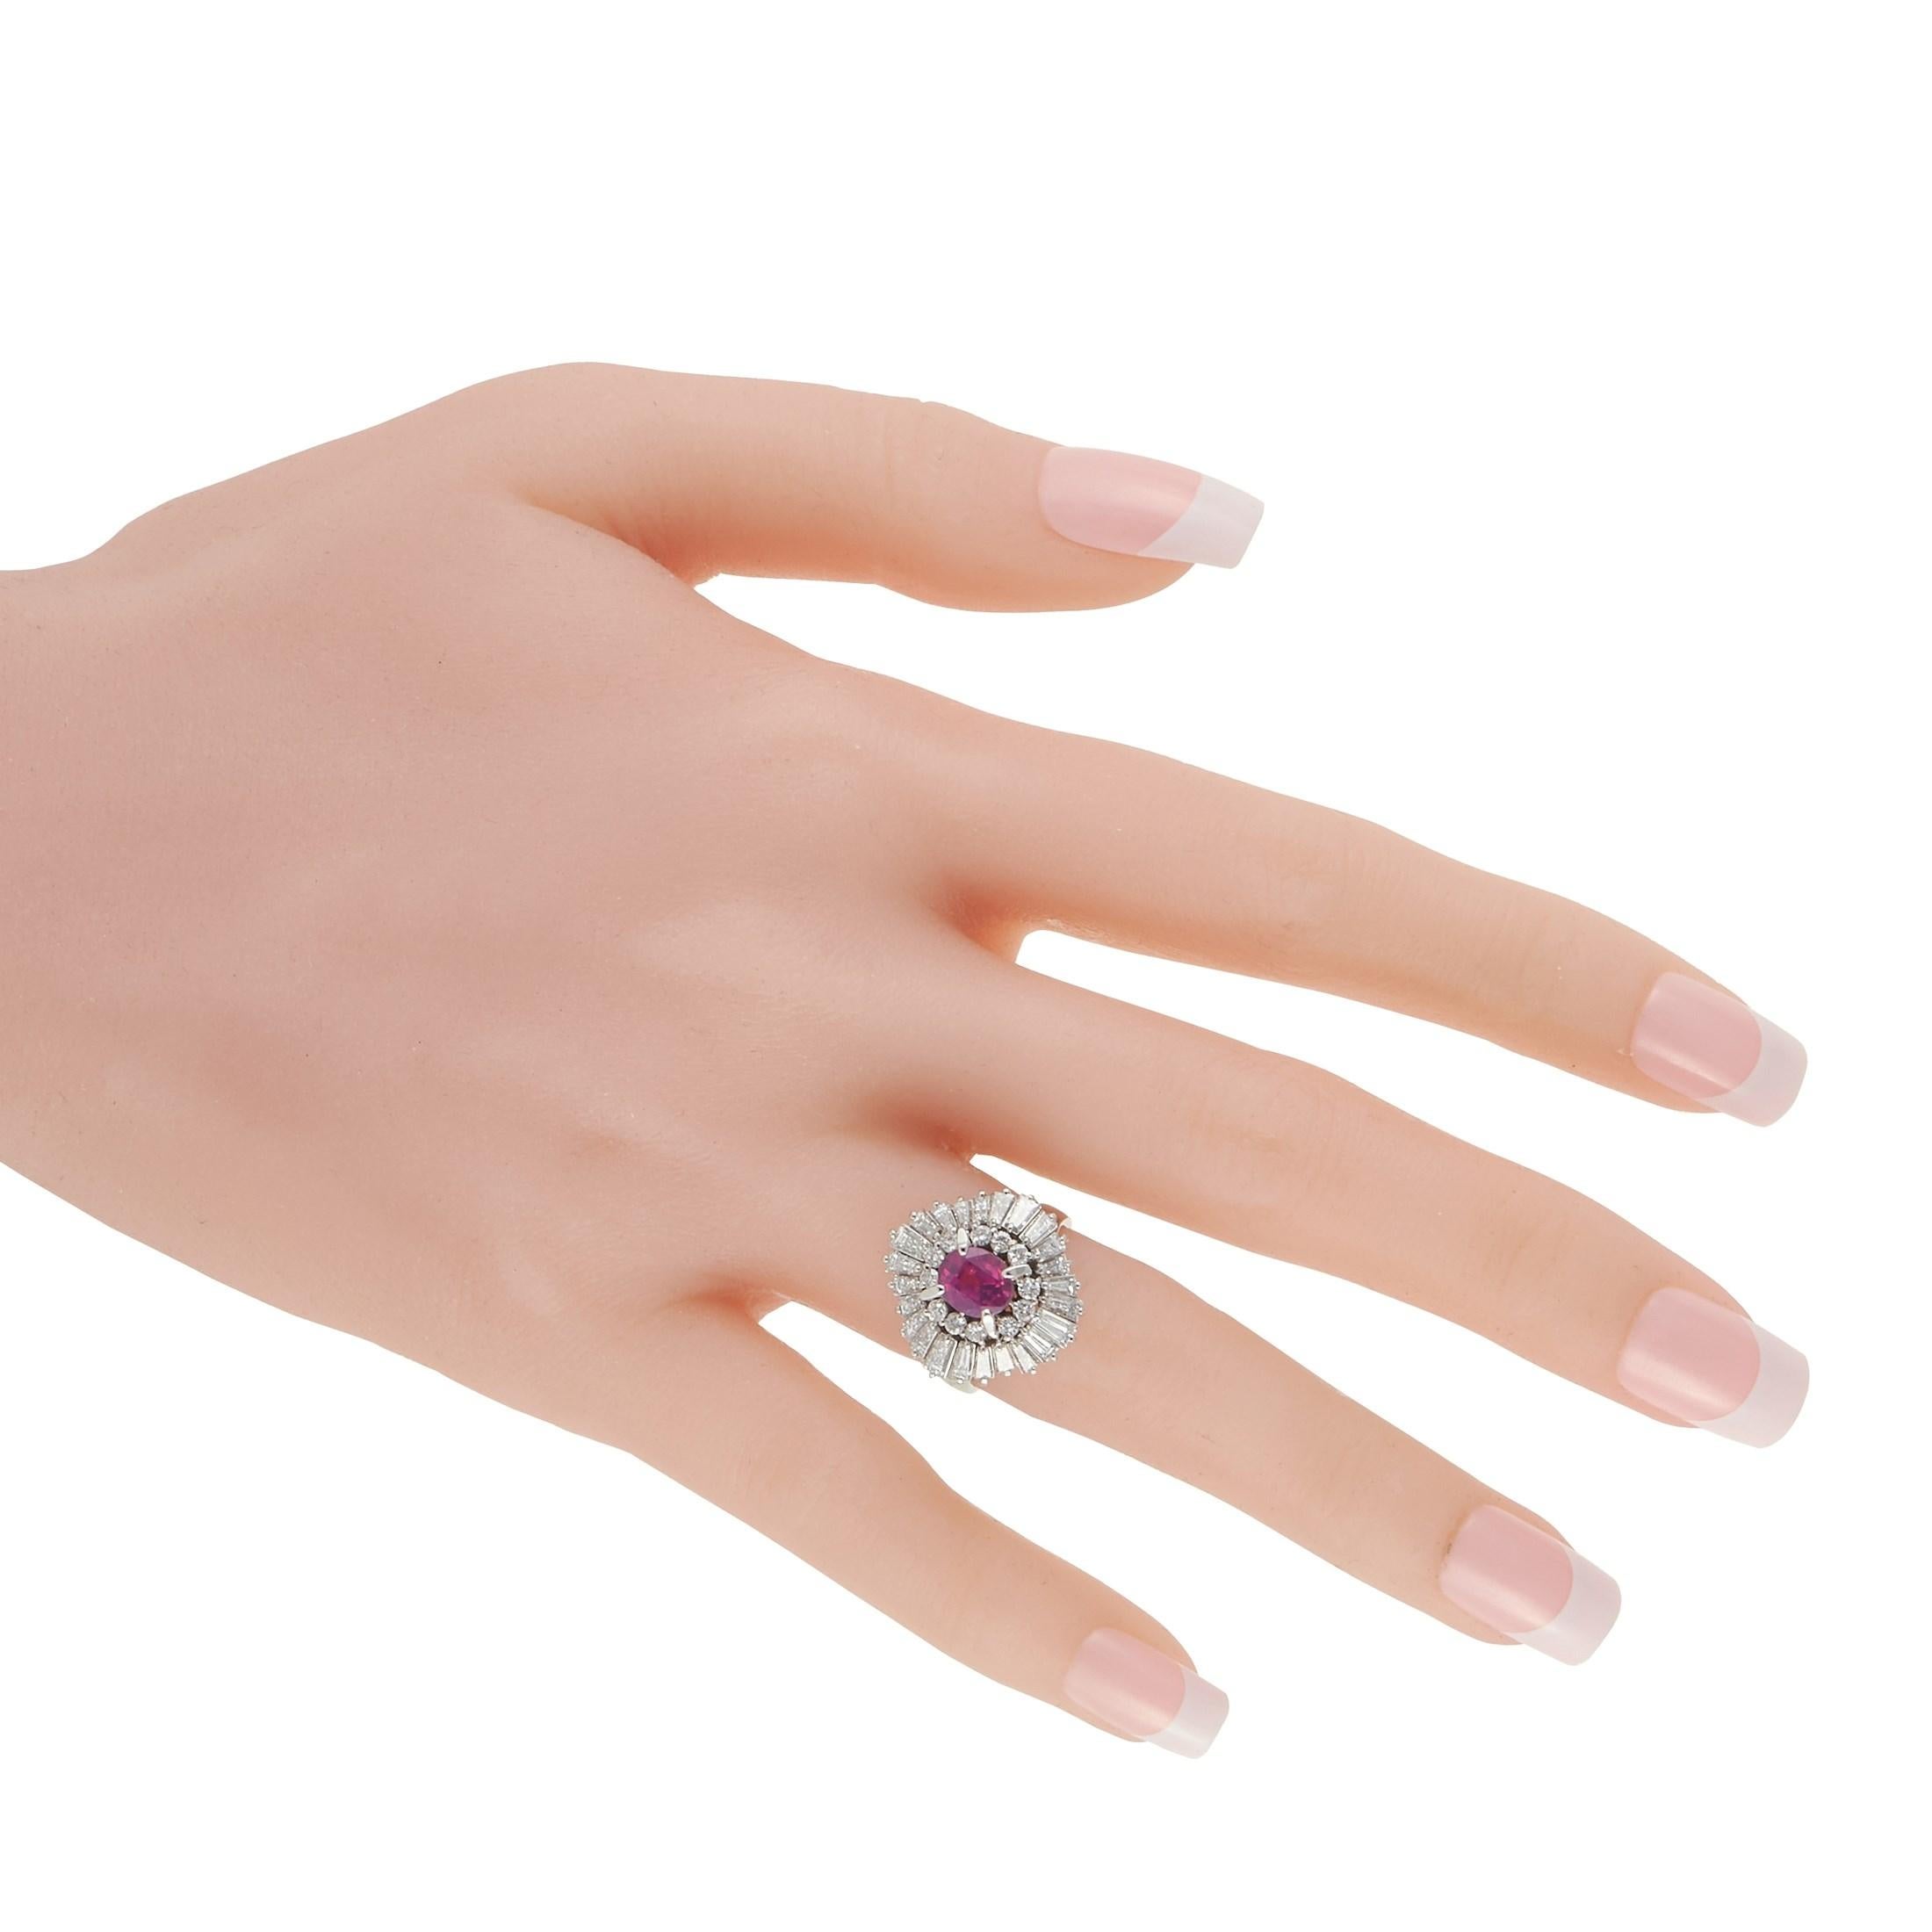 Mixed Cut LB Exclusive Platinum 2.05 Ct Diamond and Pink Sapphire Ring